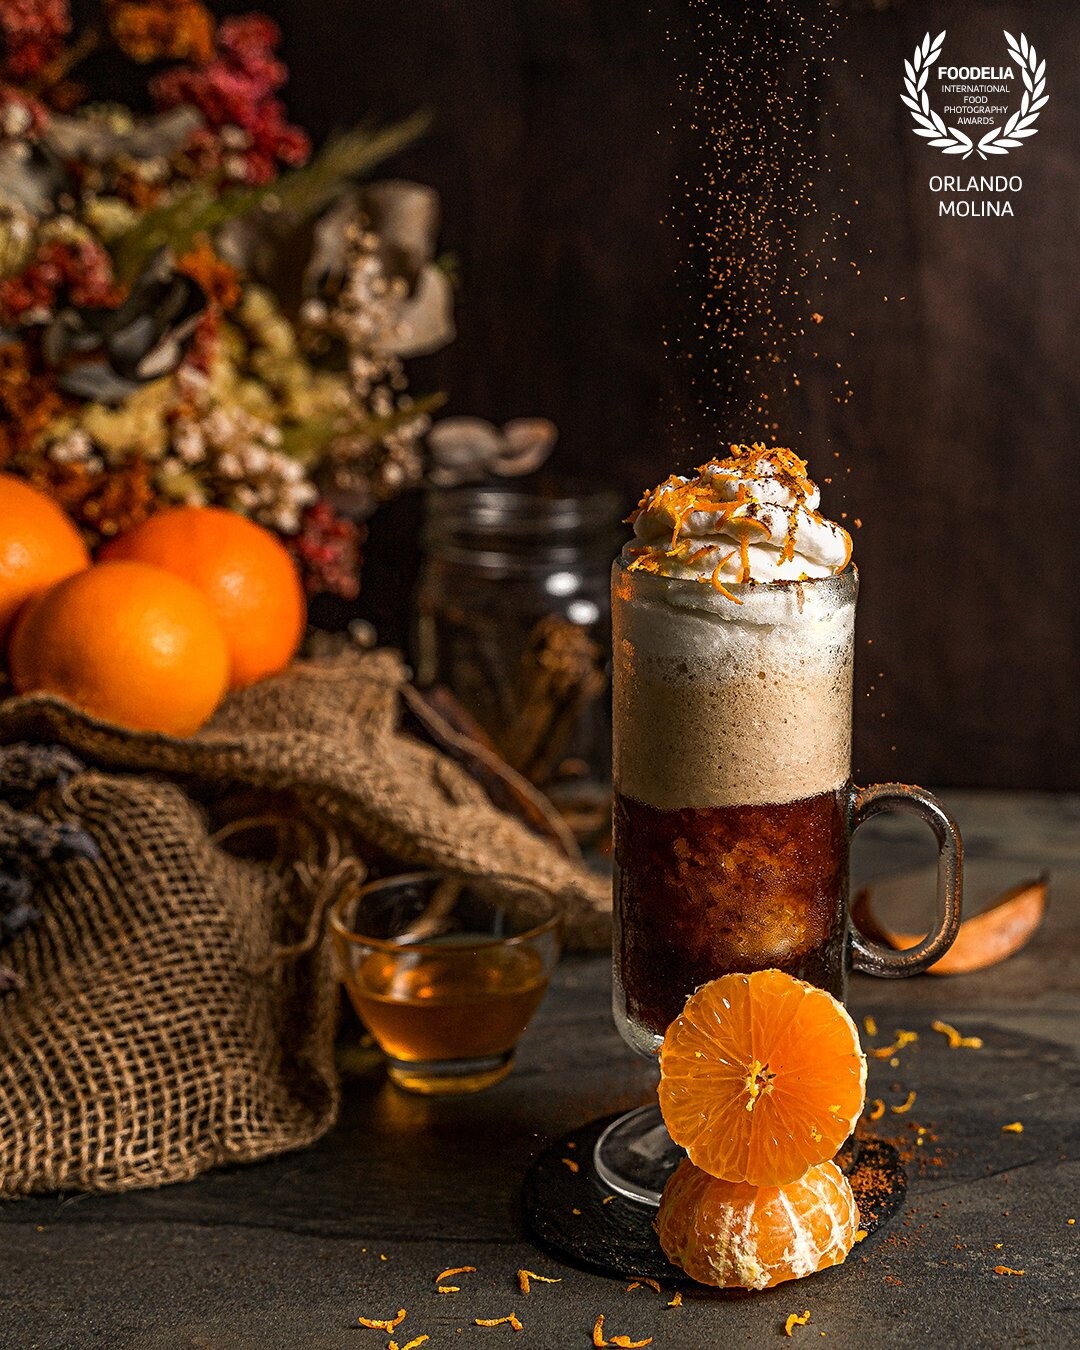 Orange coffee with cinnamon. It's magical and really tasty! I had fun doing this shoot and of course I drank this deliciousness after